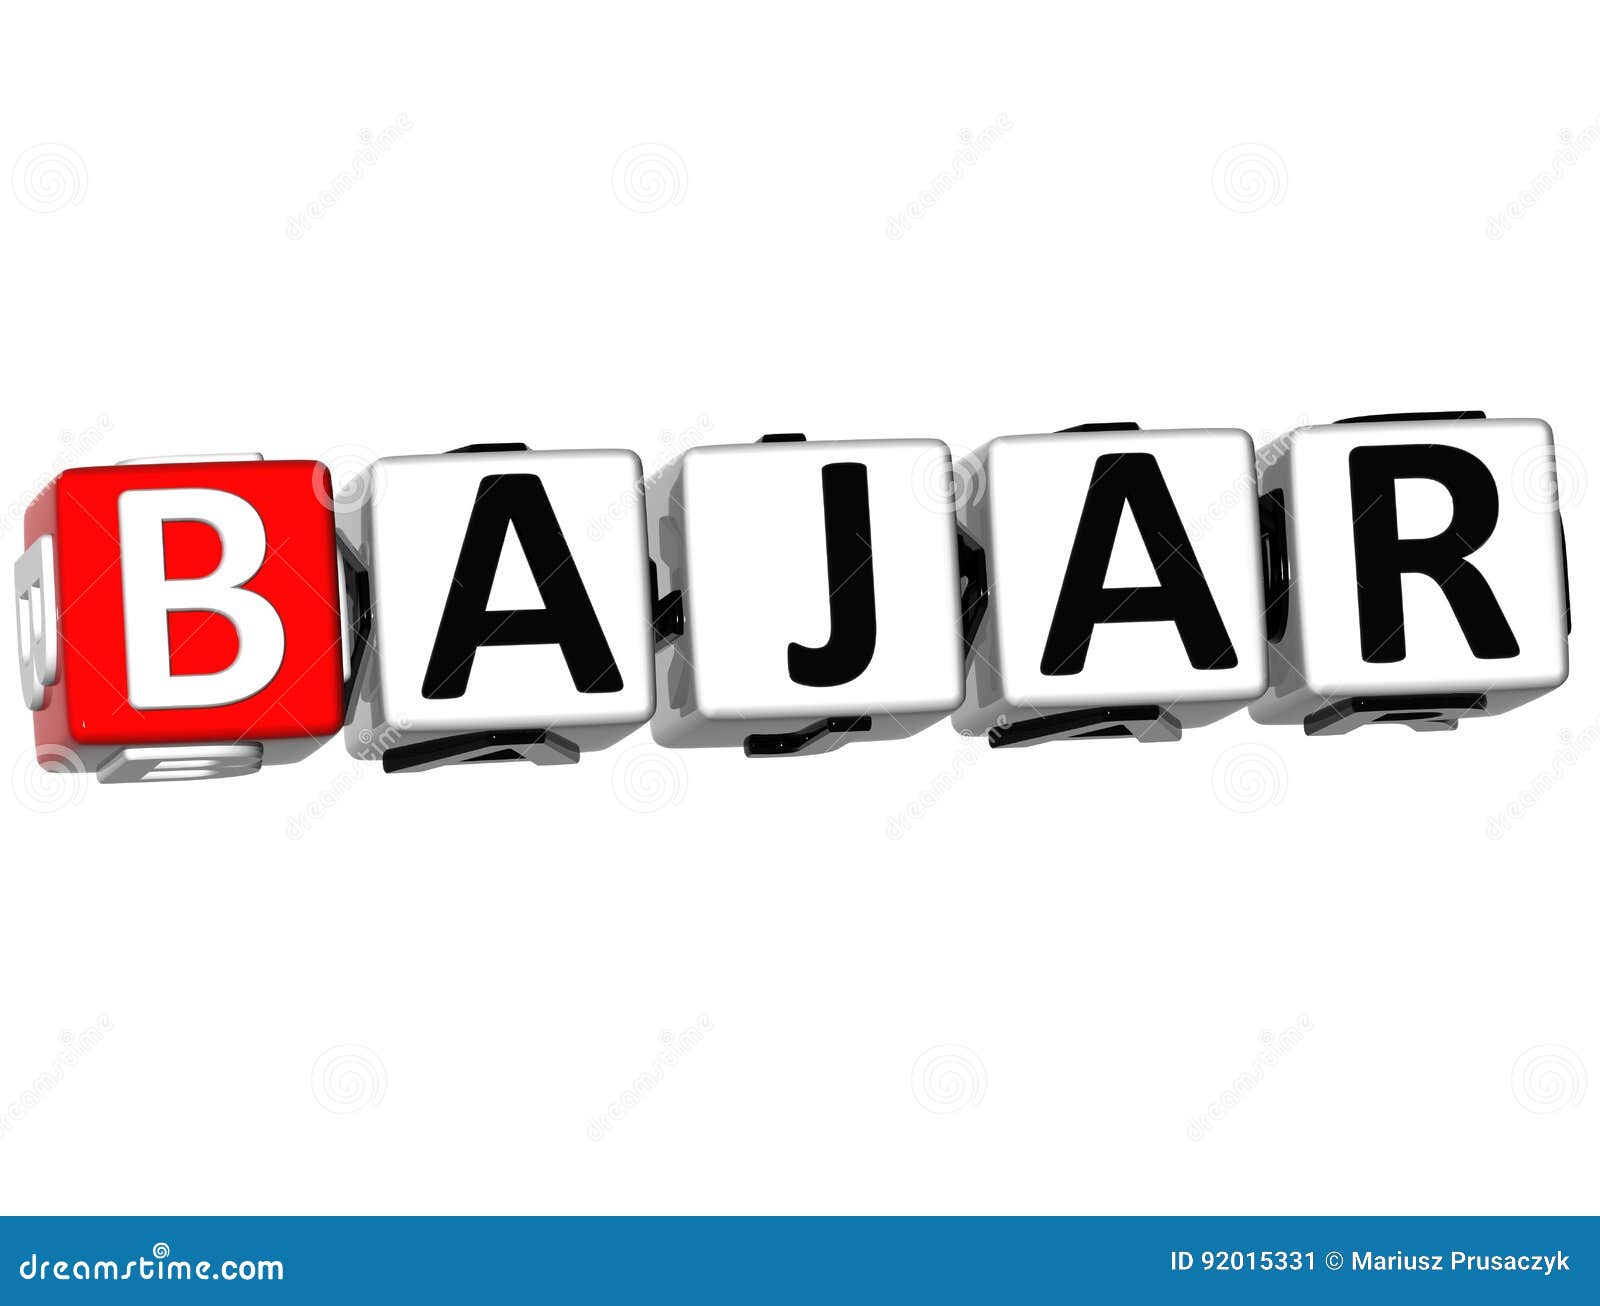 3d bajar block text on white background